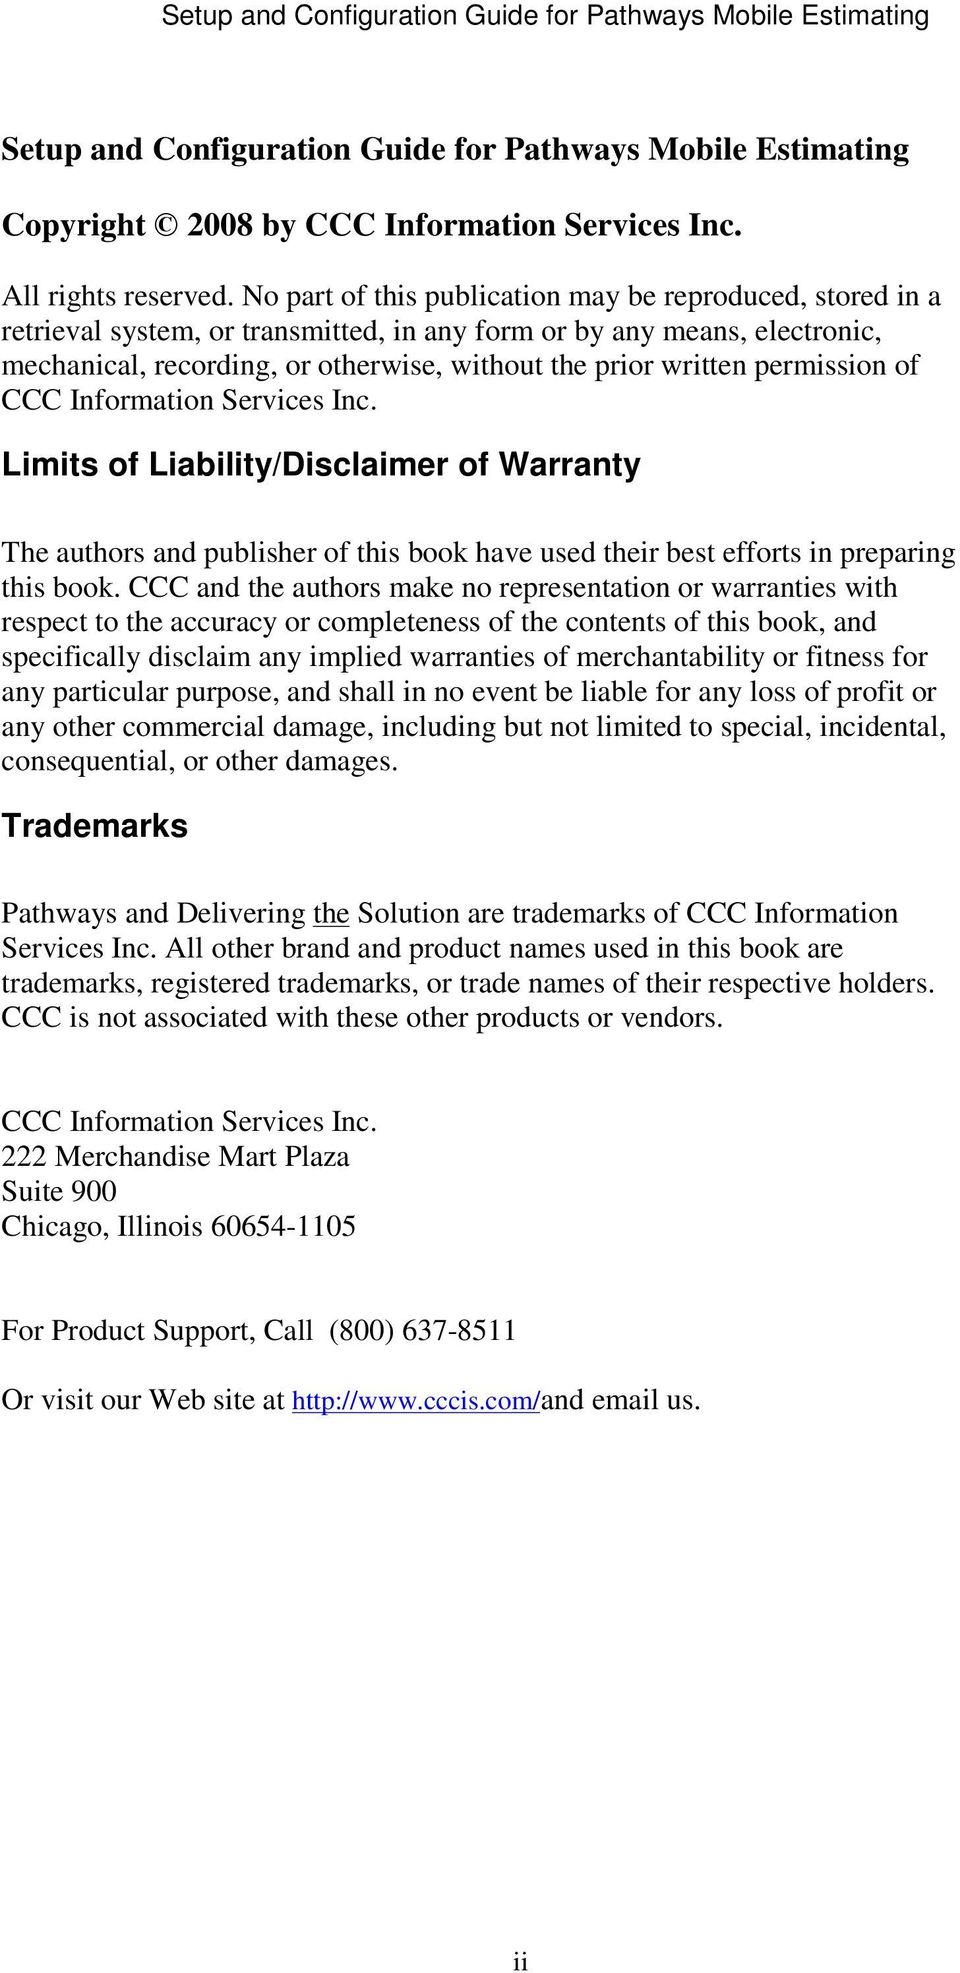 permission of CCC Information Services Inc. Limits of Liability/Disclaimer of Warranty The authors and publisher of this book have used their best efforts in preparing this book.